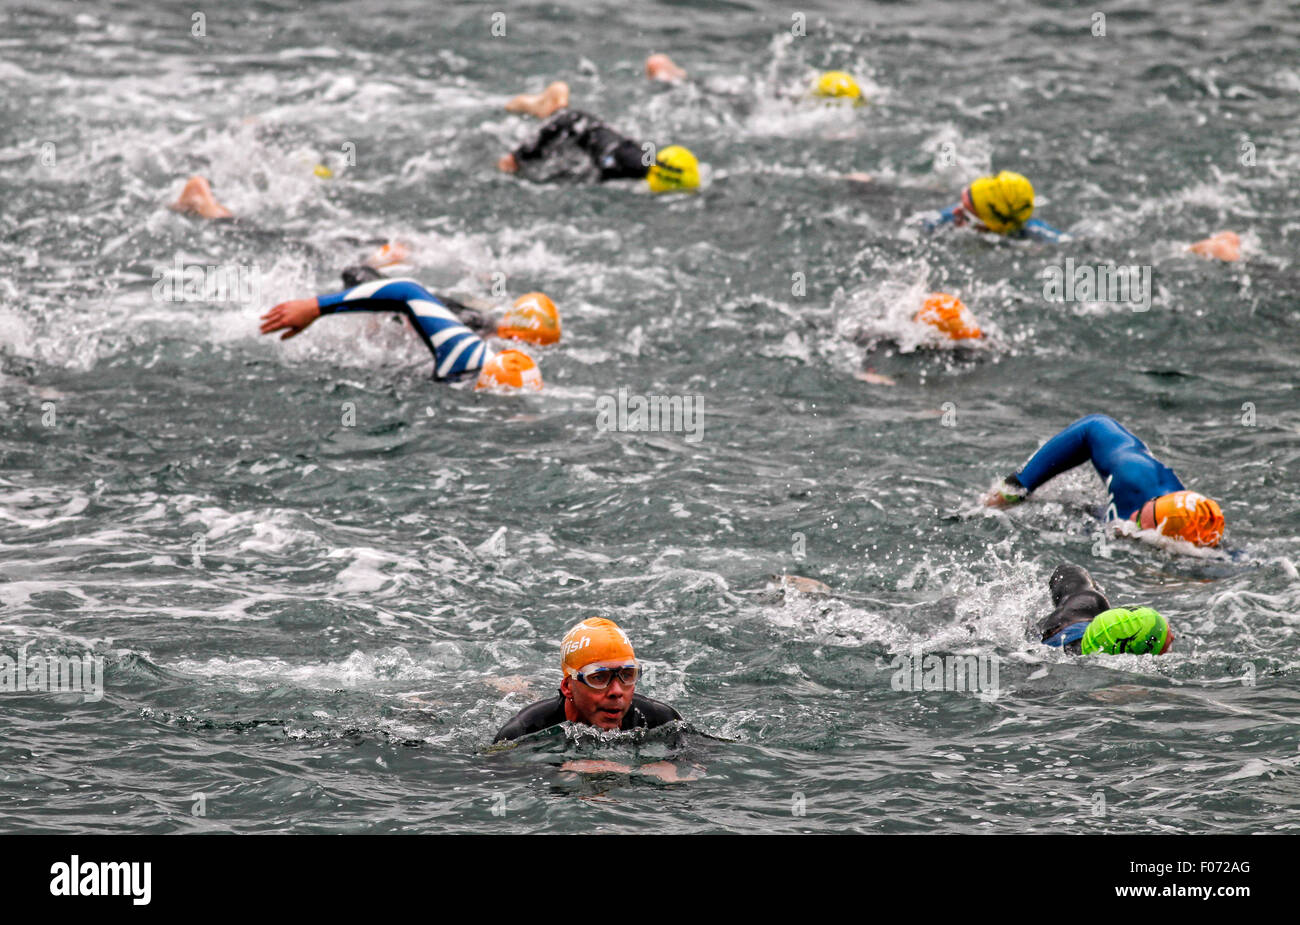 Dublin, Ireland. 09th Aug, 2015. Participants in the Ironman triathlon event in Dublin start the event by swimming 1.9km in Scotsman's Bay, Dun Laoghaire, Dublin, Ireland on 9th August 2015. Around 2500 athletes participated in the event, the first to be held in Dublin. Credit:  Glyn Thomas Photography/Alamy Live News Stock Photo